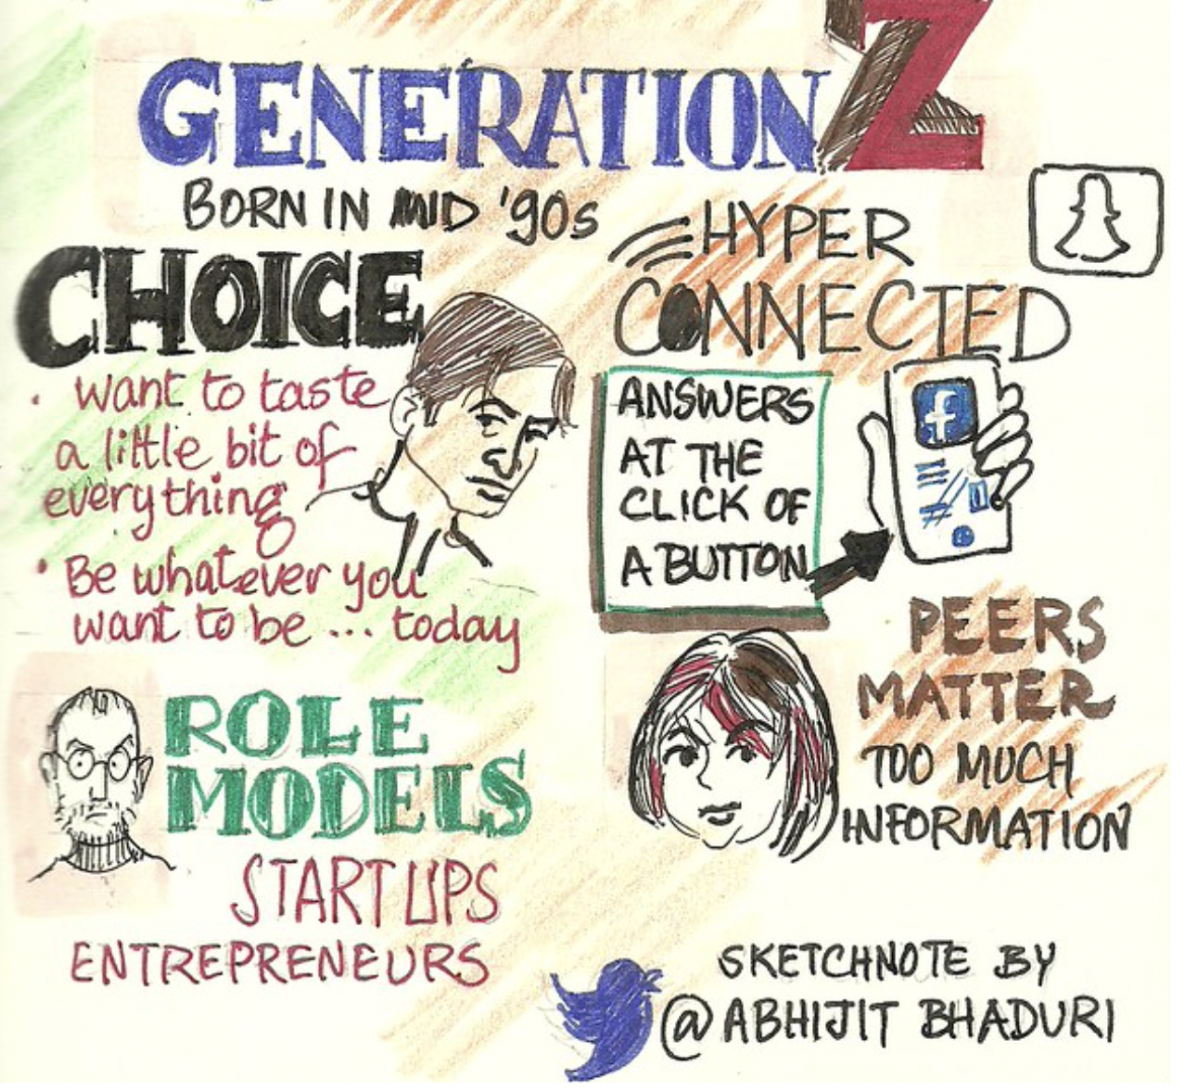 Sketch showing various defining aspects of Gen Z and the way the generation grew up, such as the use of social media and the overflow of information, things often taken by older generations as causes of Gen Z’s behavior and lifestyle. (Abhijit Bhaduri/Openverse)